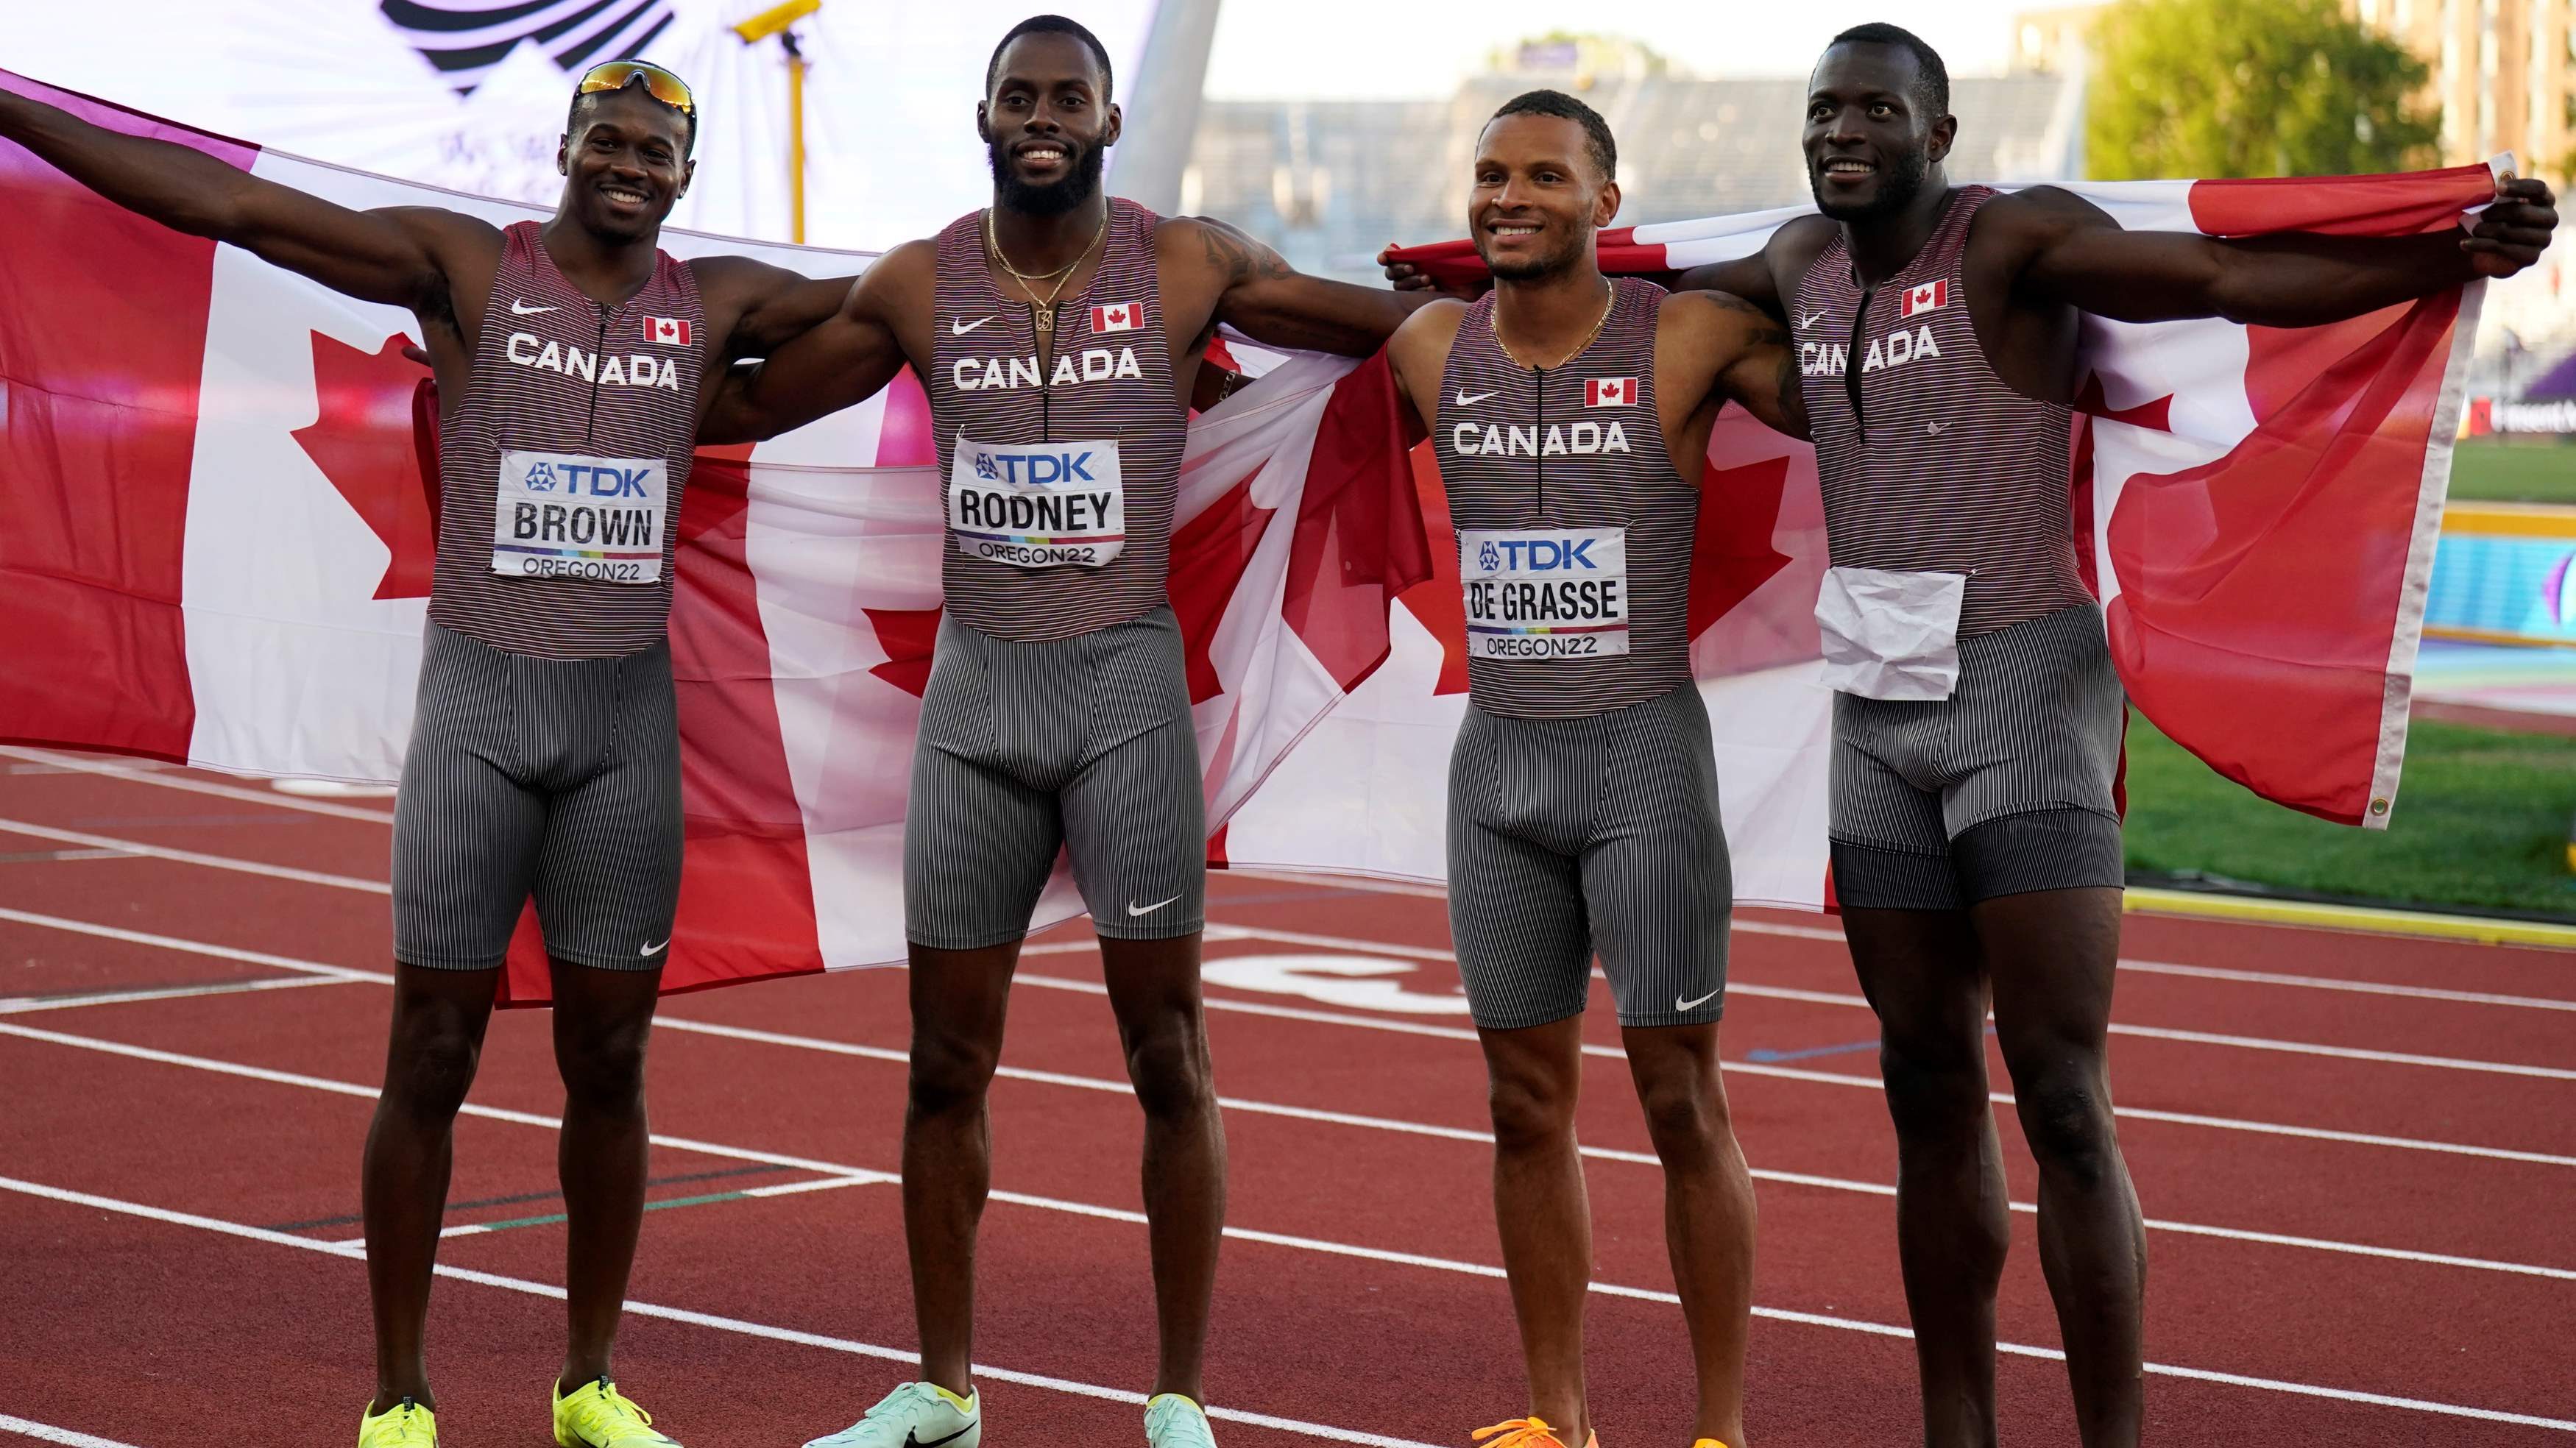 A few Canadians to watch at the World Athletics Championships - Team Canada  - Official Olympic Team Website